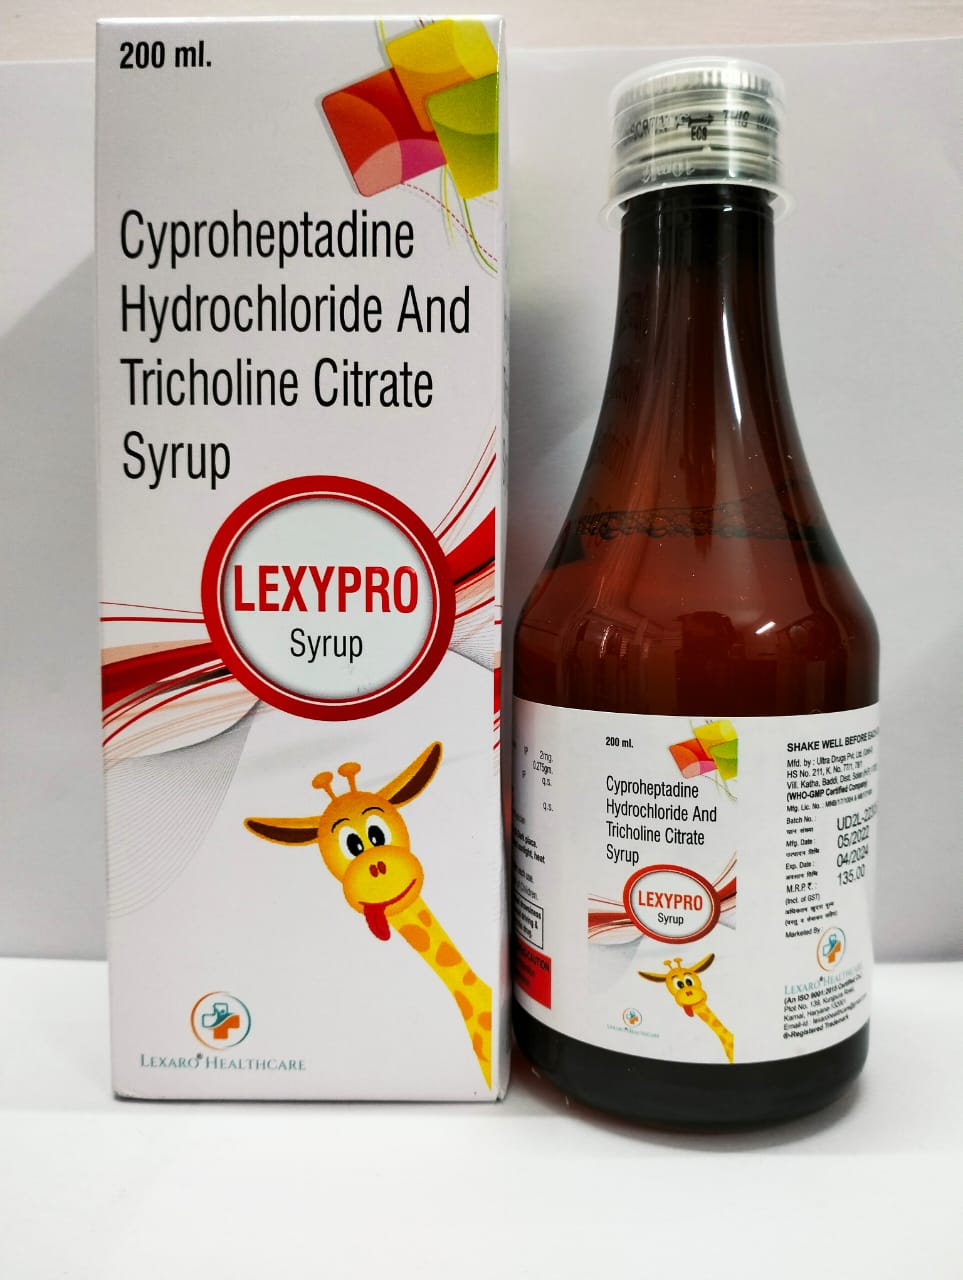 cyproheptadine hcl 2mg +tricholine
citrate solution275mg